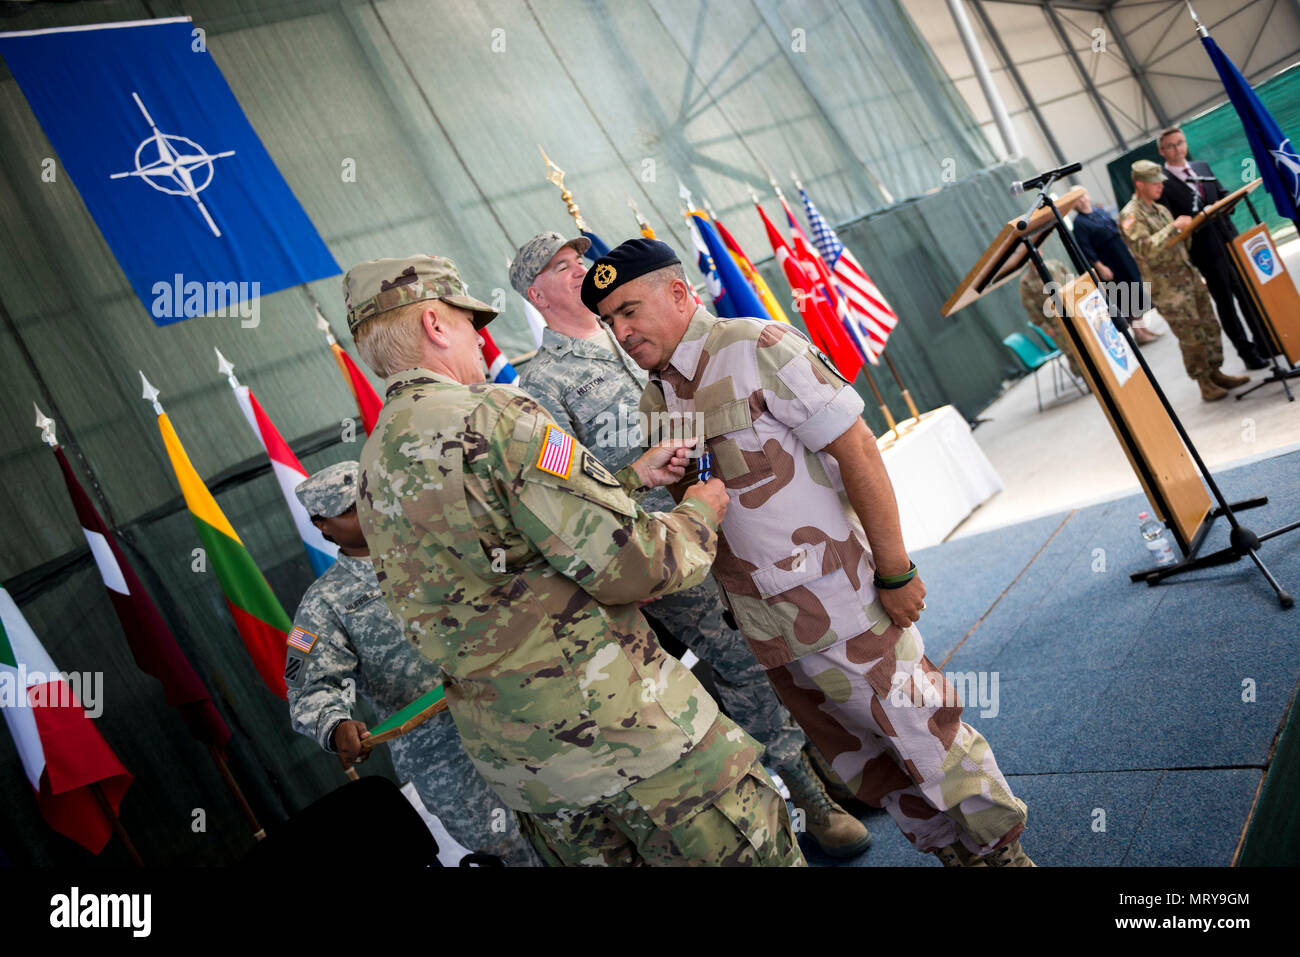 U.S. Army Brig. Gen. Giselle Wilz transfers authority of NATO Headquarters Sarajevo to U.S. Air Force Brig. Gen. Robert Huston during a ceremony held on June 27th, 2017 at Camp Butmir, Bosnia and Herzegovina. (U.S. Air Force photo by Tech. Sgt. Jeremy Bowcock) Stock Photo